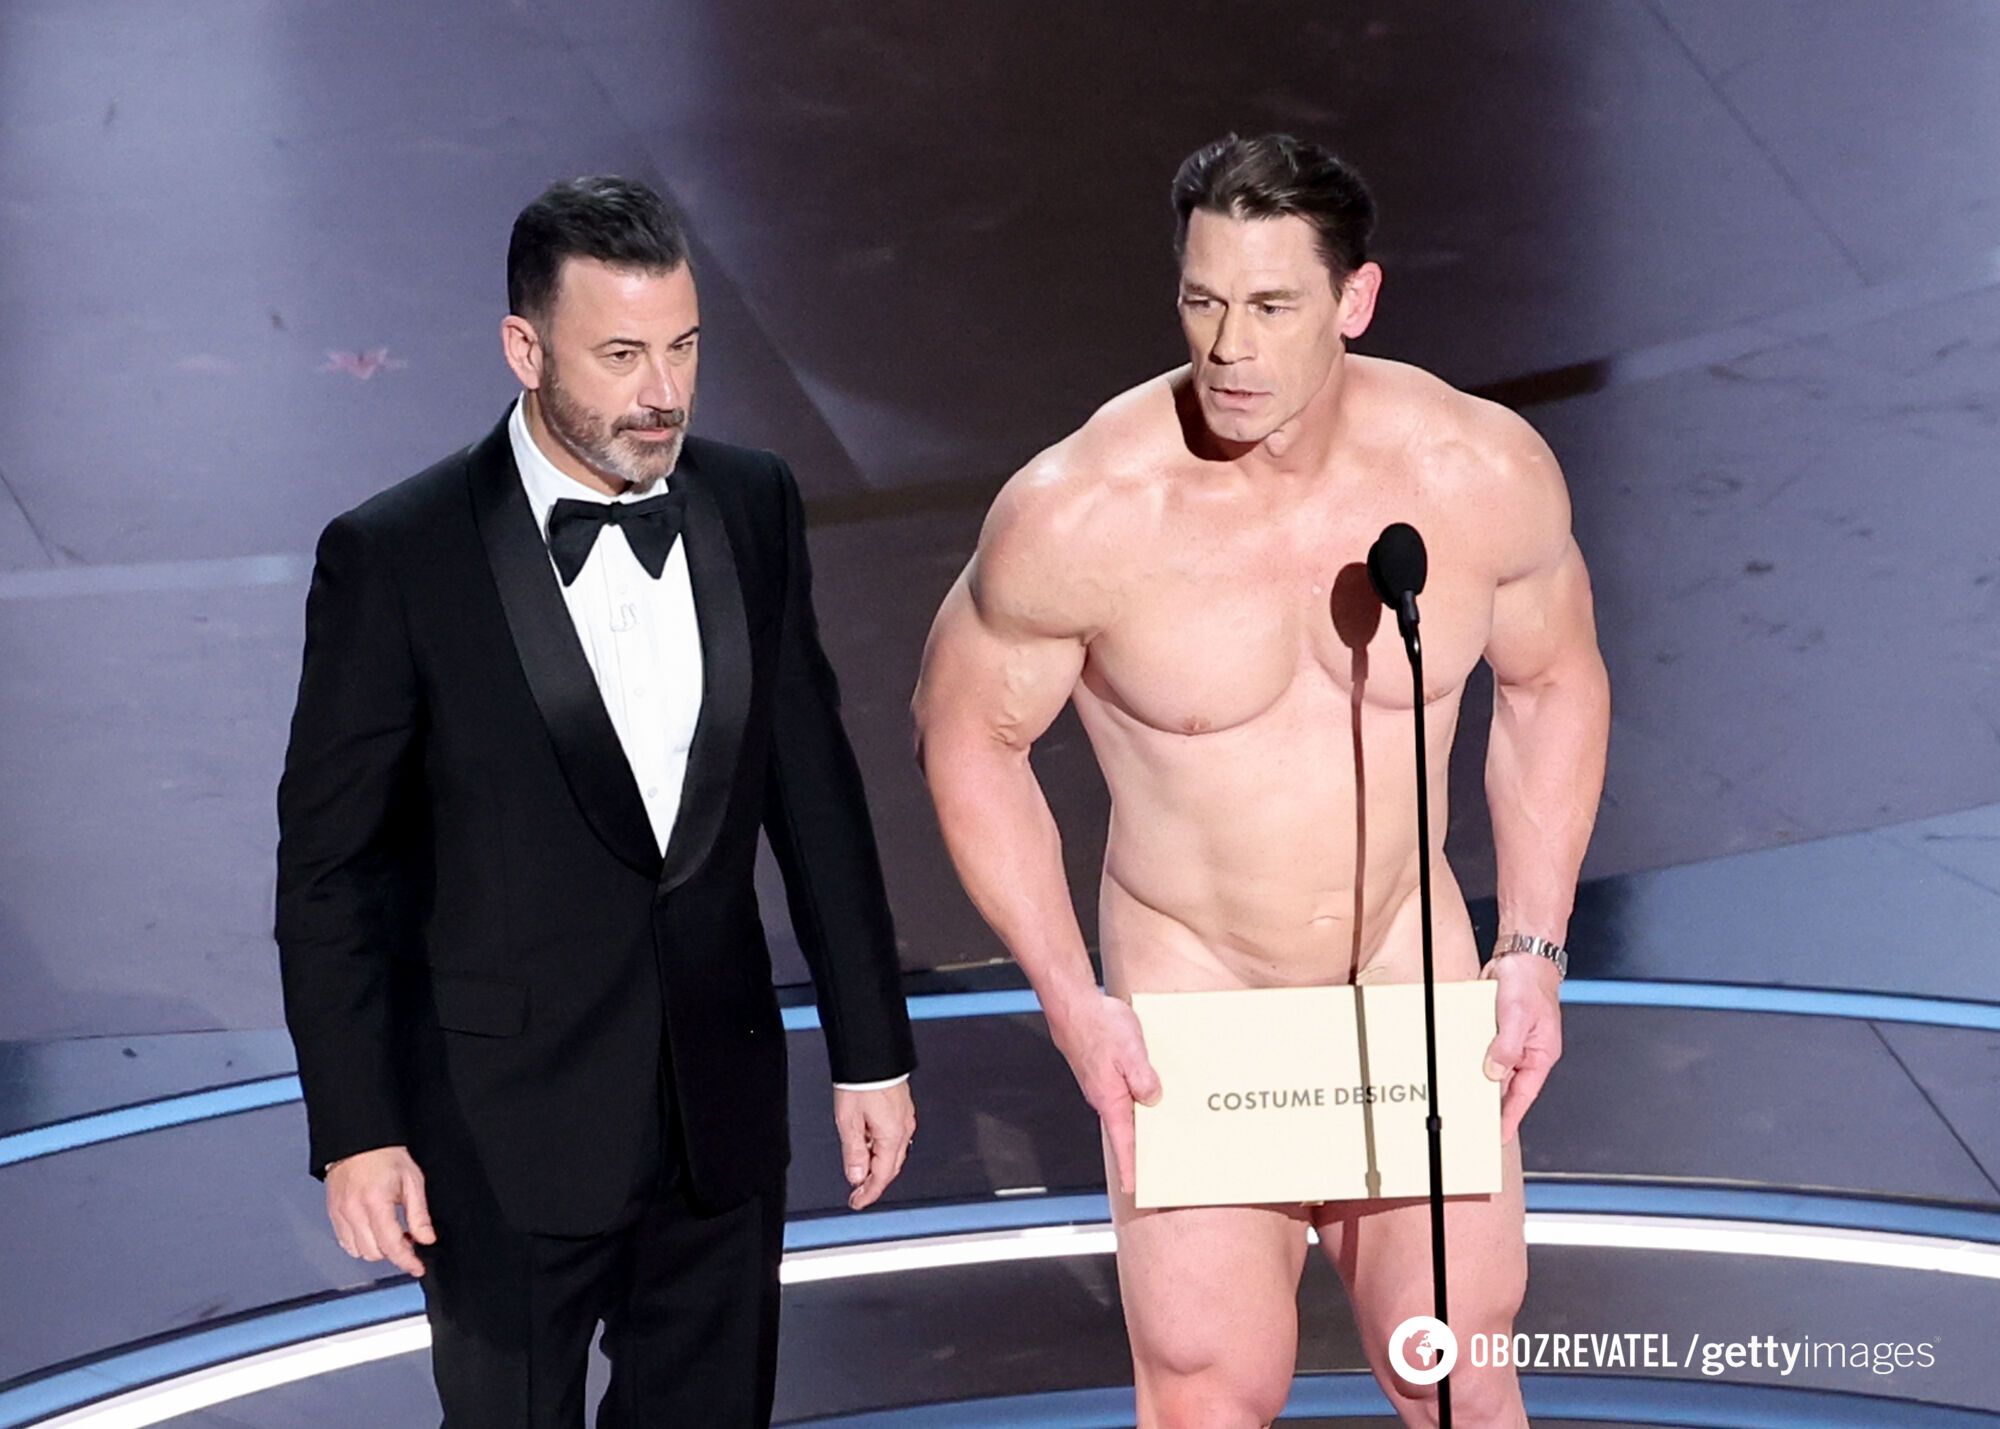 Naked John Cena helped set a record at the Oscars: details of a spicy number with a ''Ken doll'' surfaced